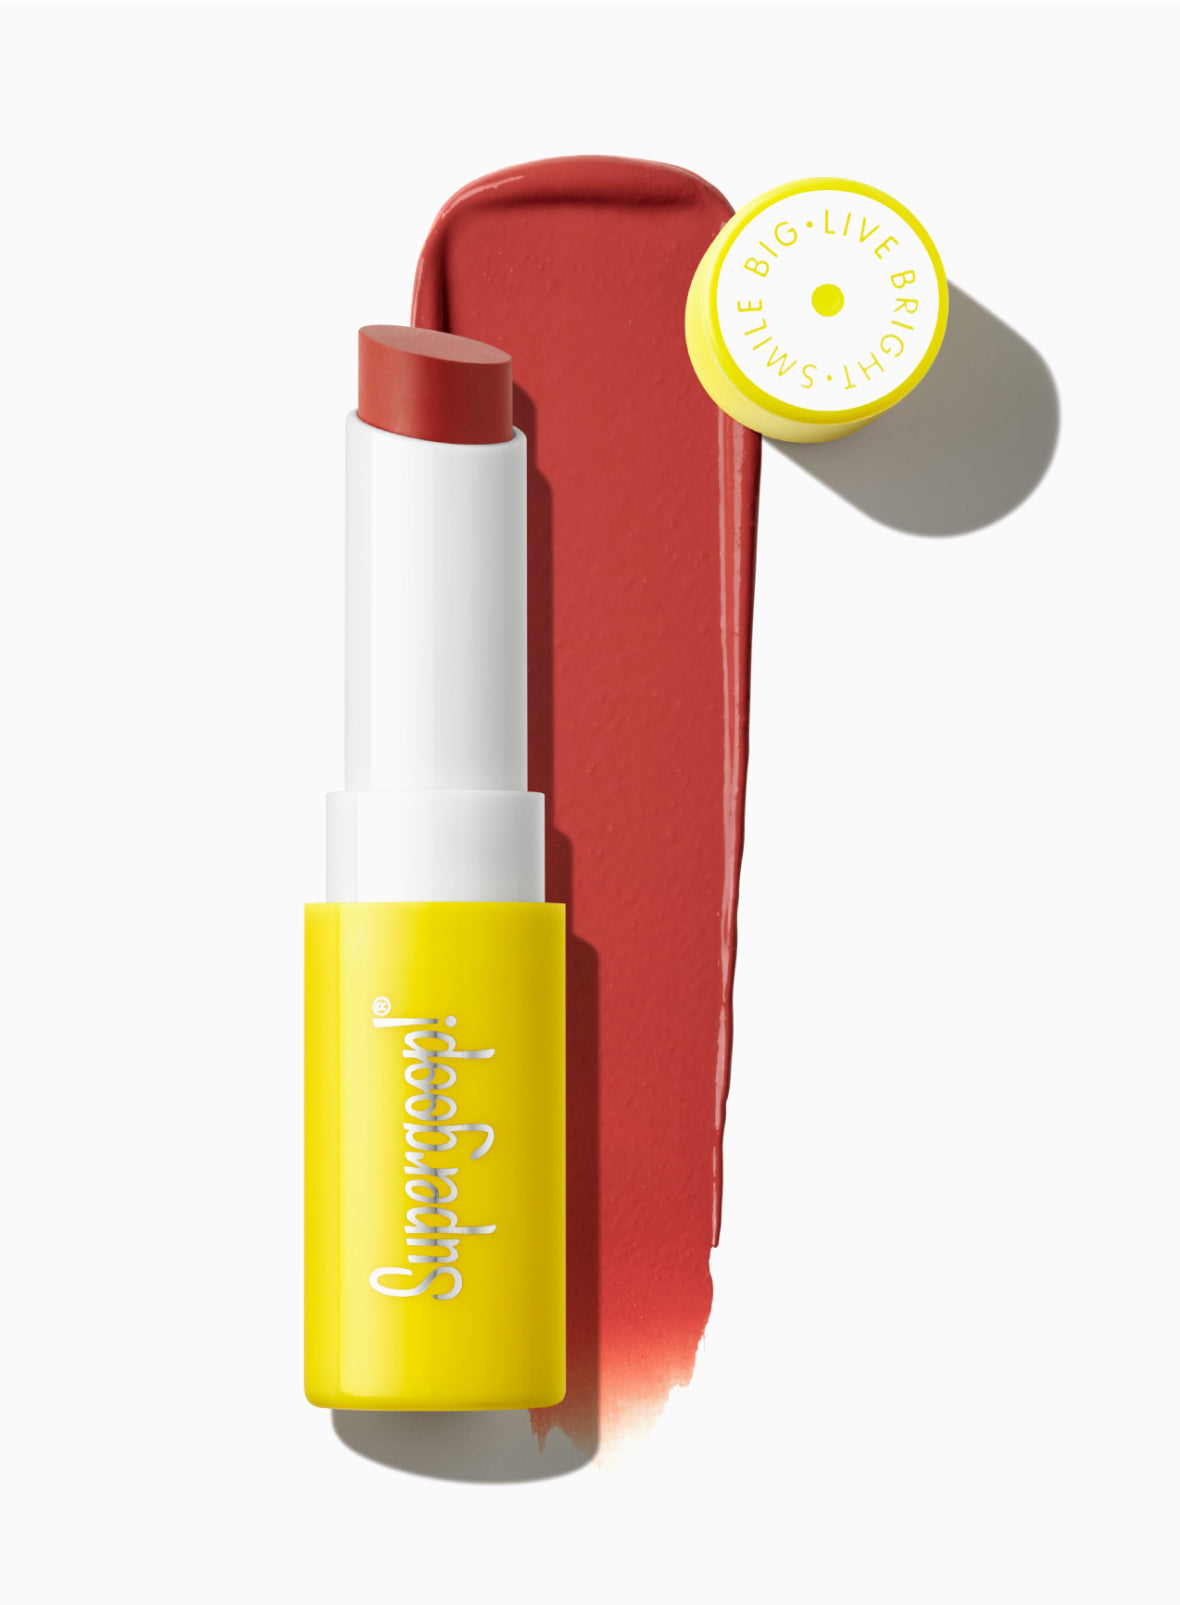 Lipshade 100% Mineral Lip Color SPF 30 Sunscreen High Five | Supergoop!